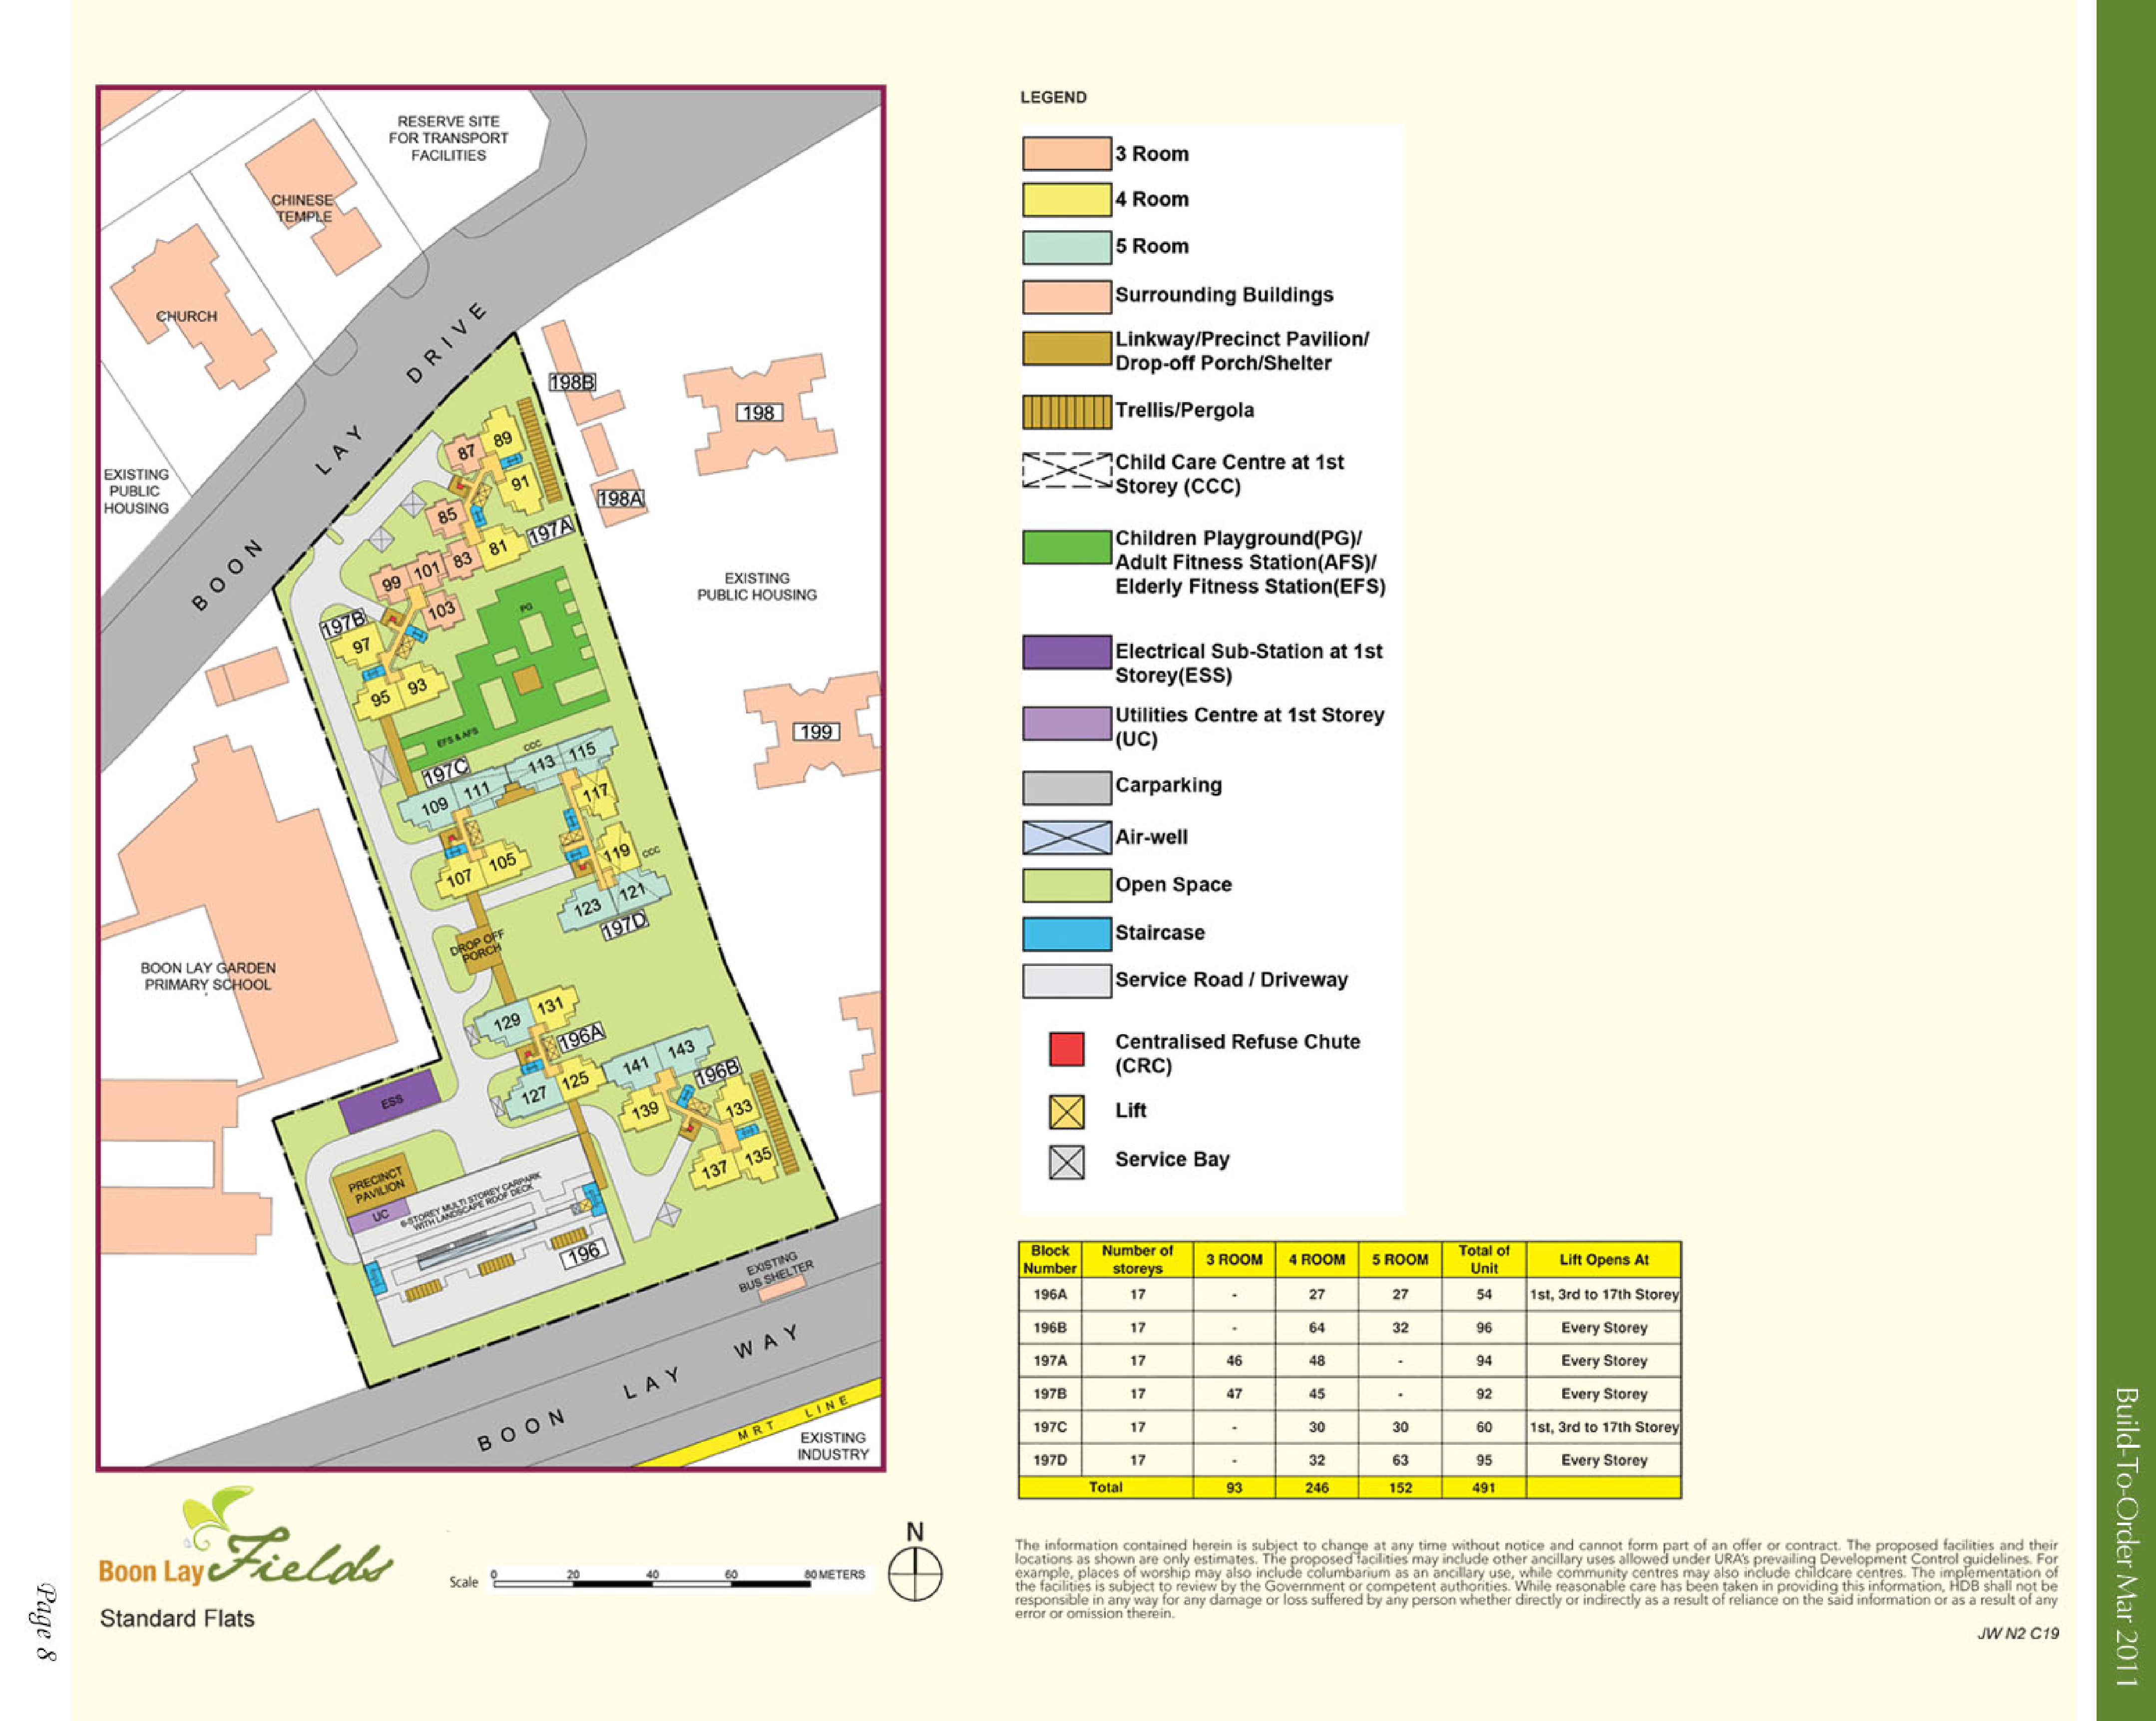 Hdb Boon Lay Fields Bto Launched In March 2011 Site Plan And Floor Plans Around Singapore Fengshui Geomancy Net